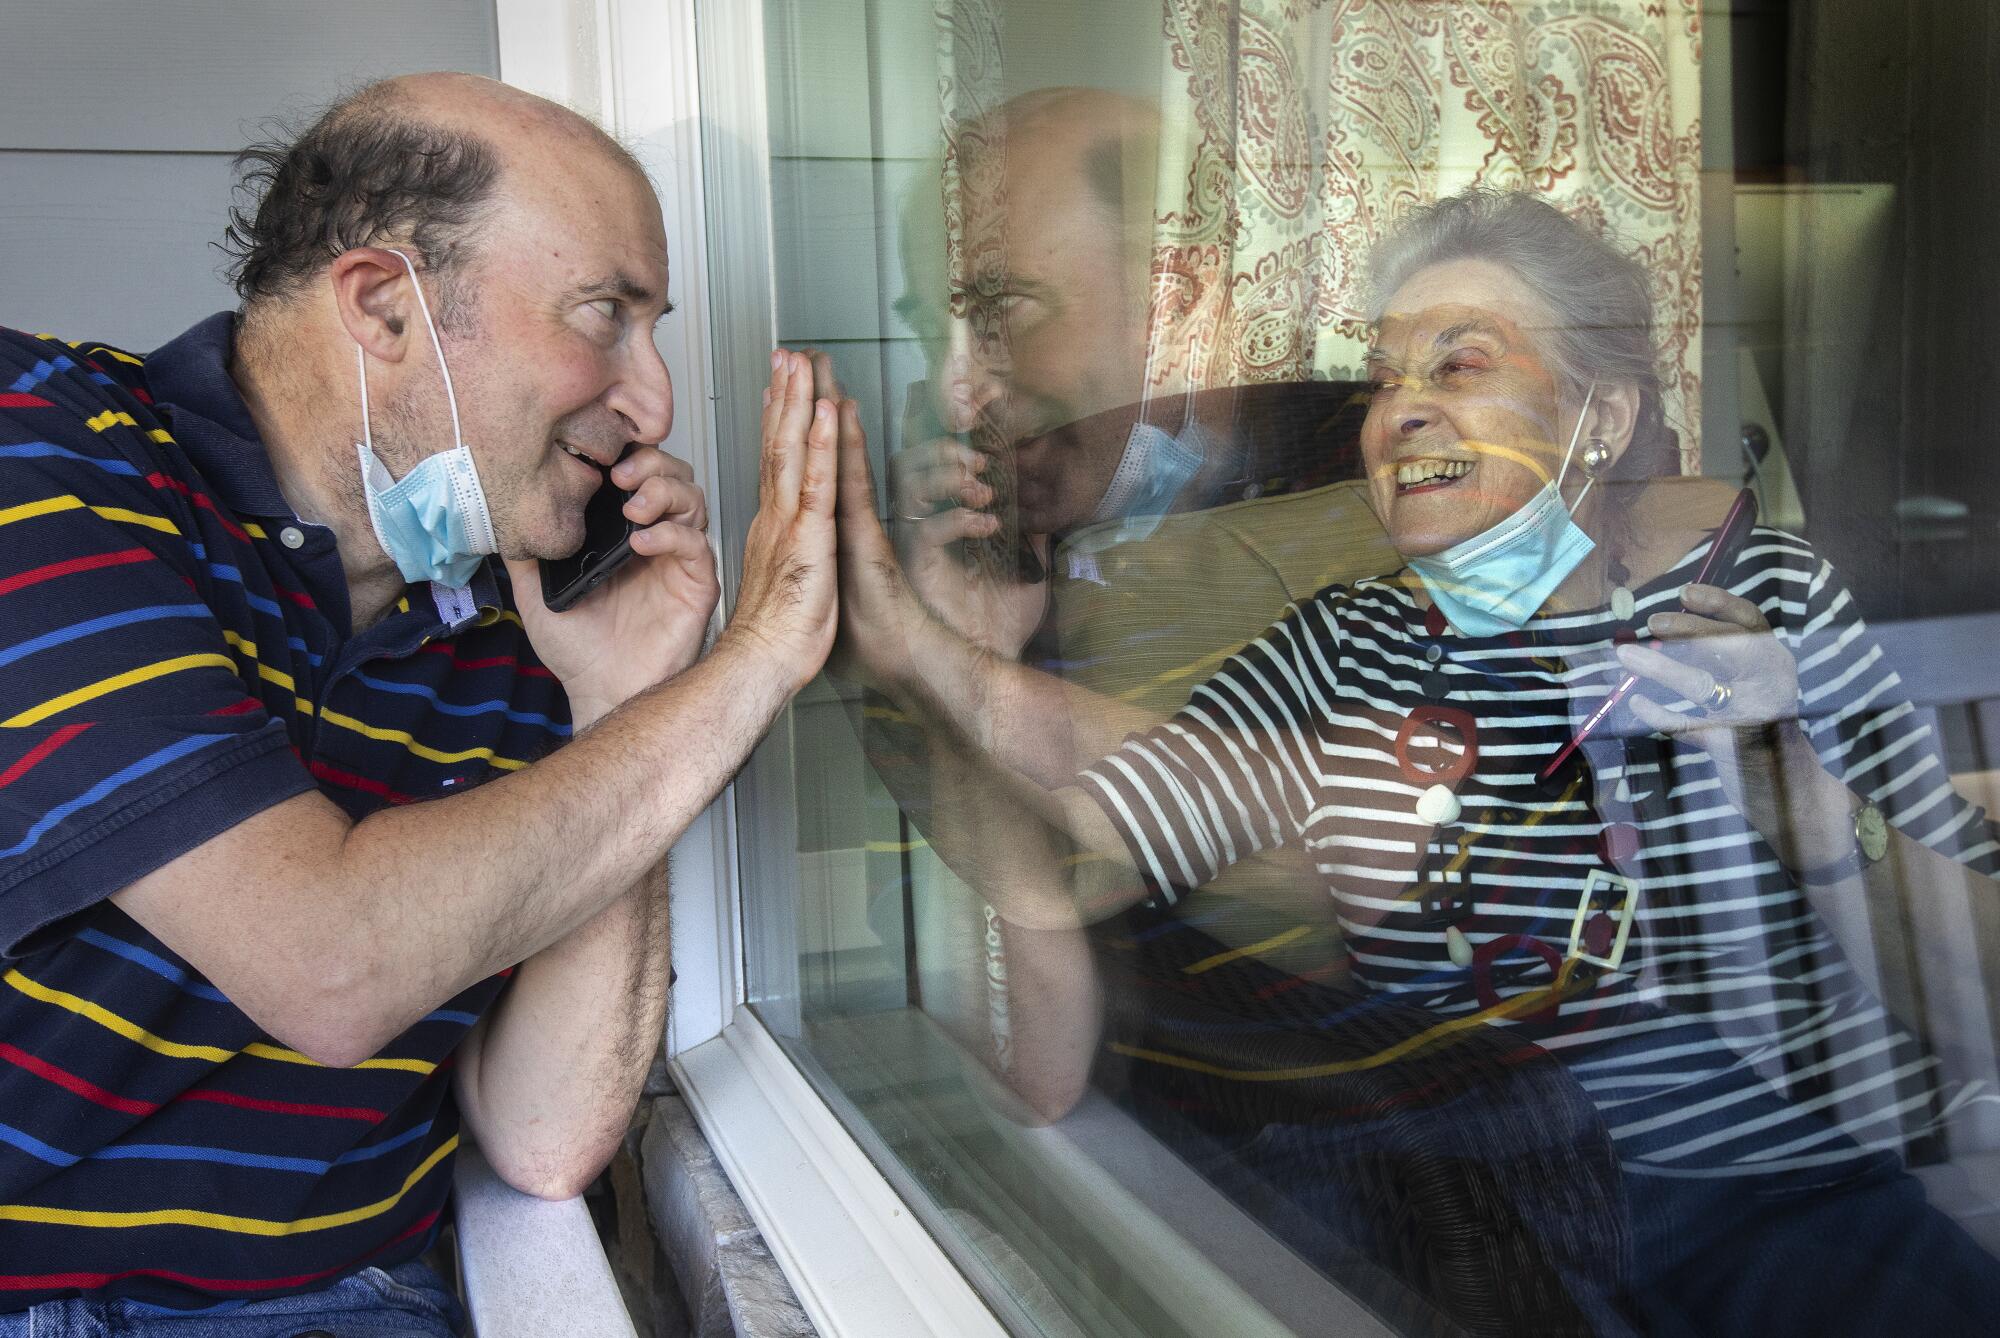 A man and his mother raise their palms to each other from opposite sides of a window while talking on cellphones